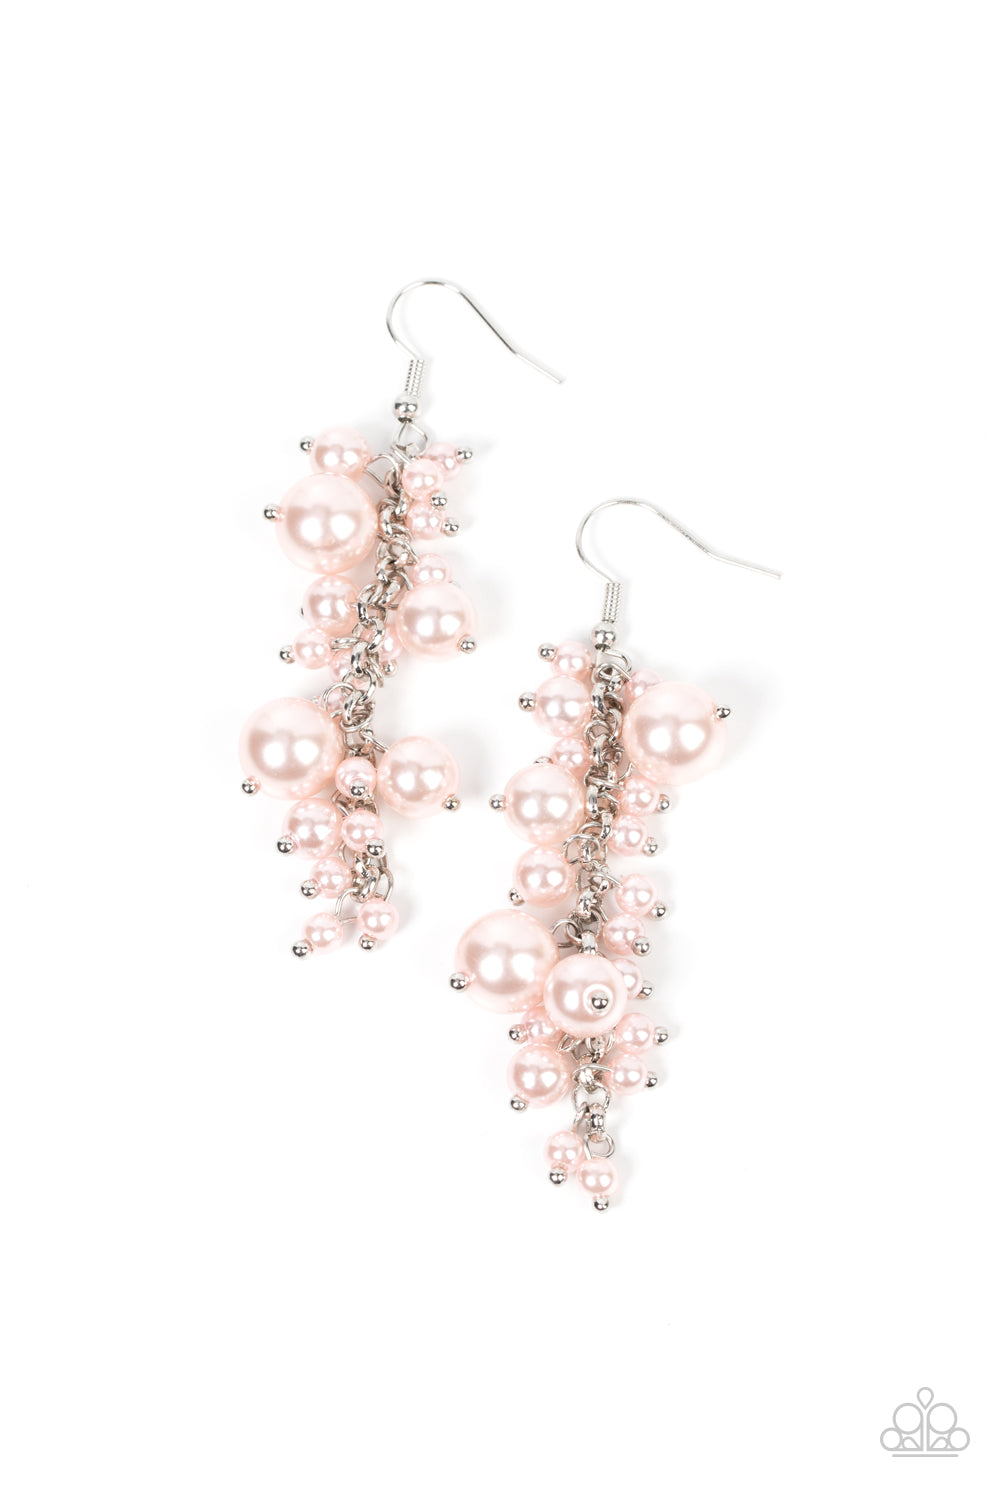 Paparazzi - The Rumors are True - Pink Earrings